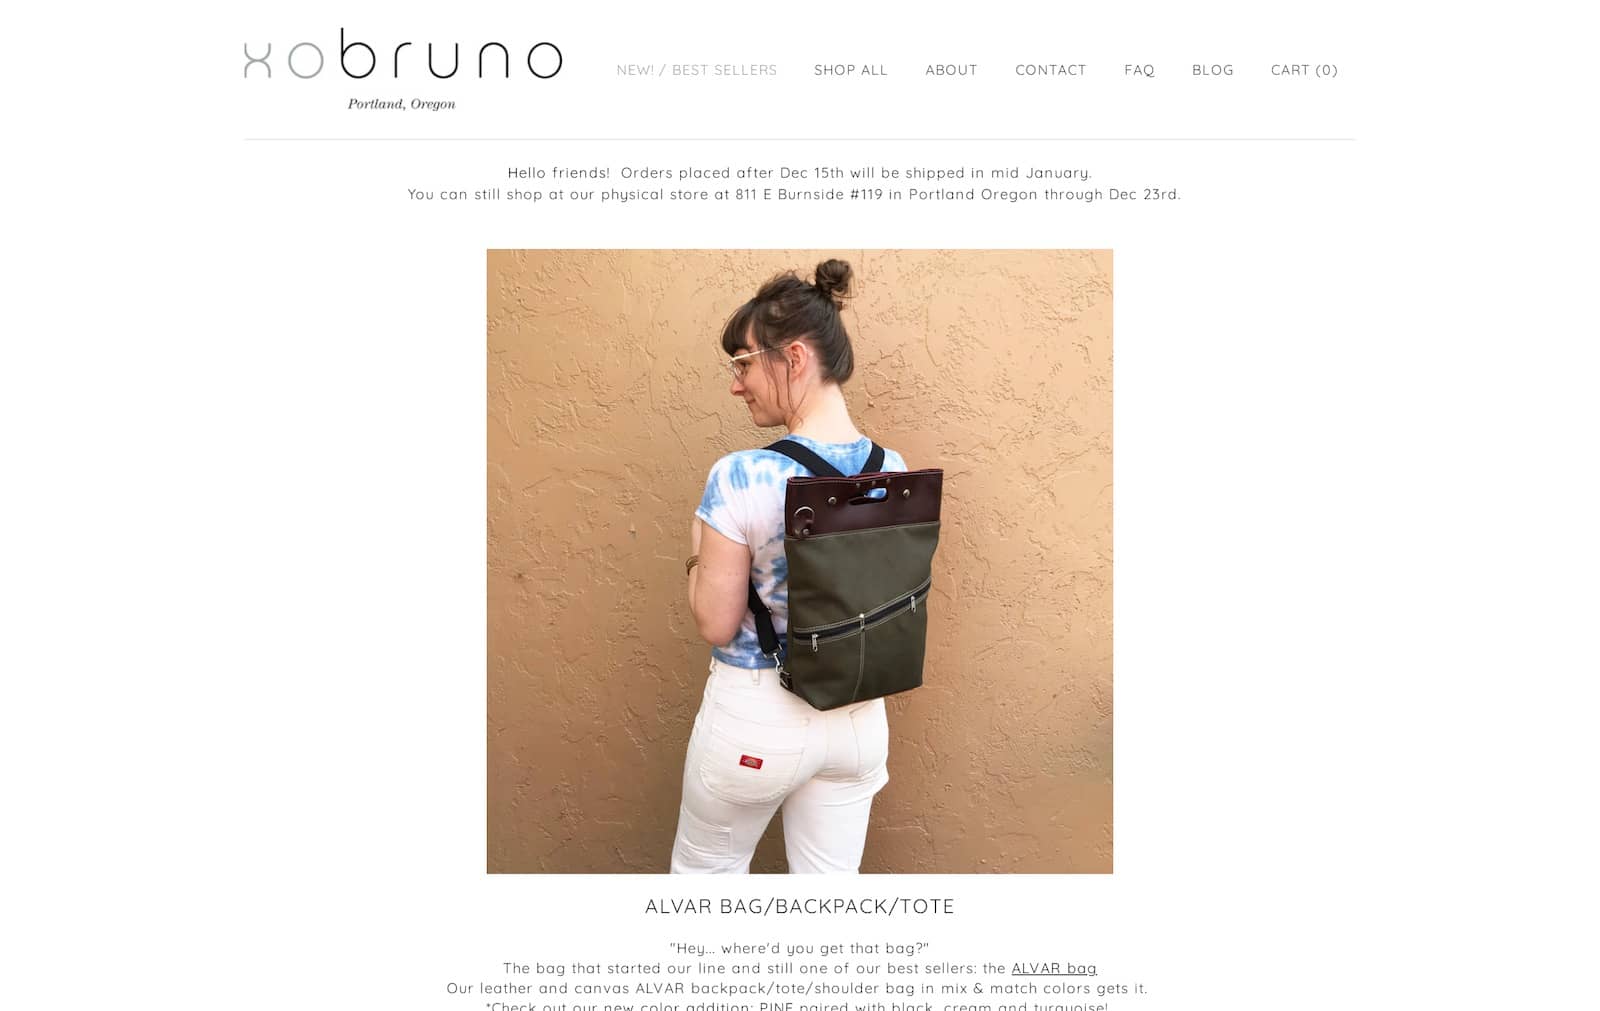 xobruno is one of the best Weebly website examples of an ecommerce store.